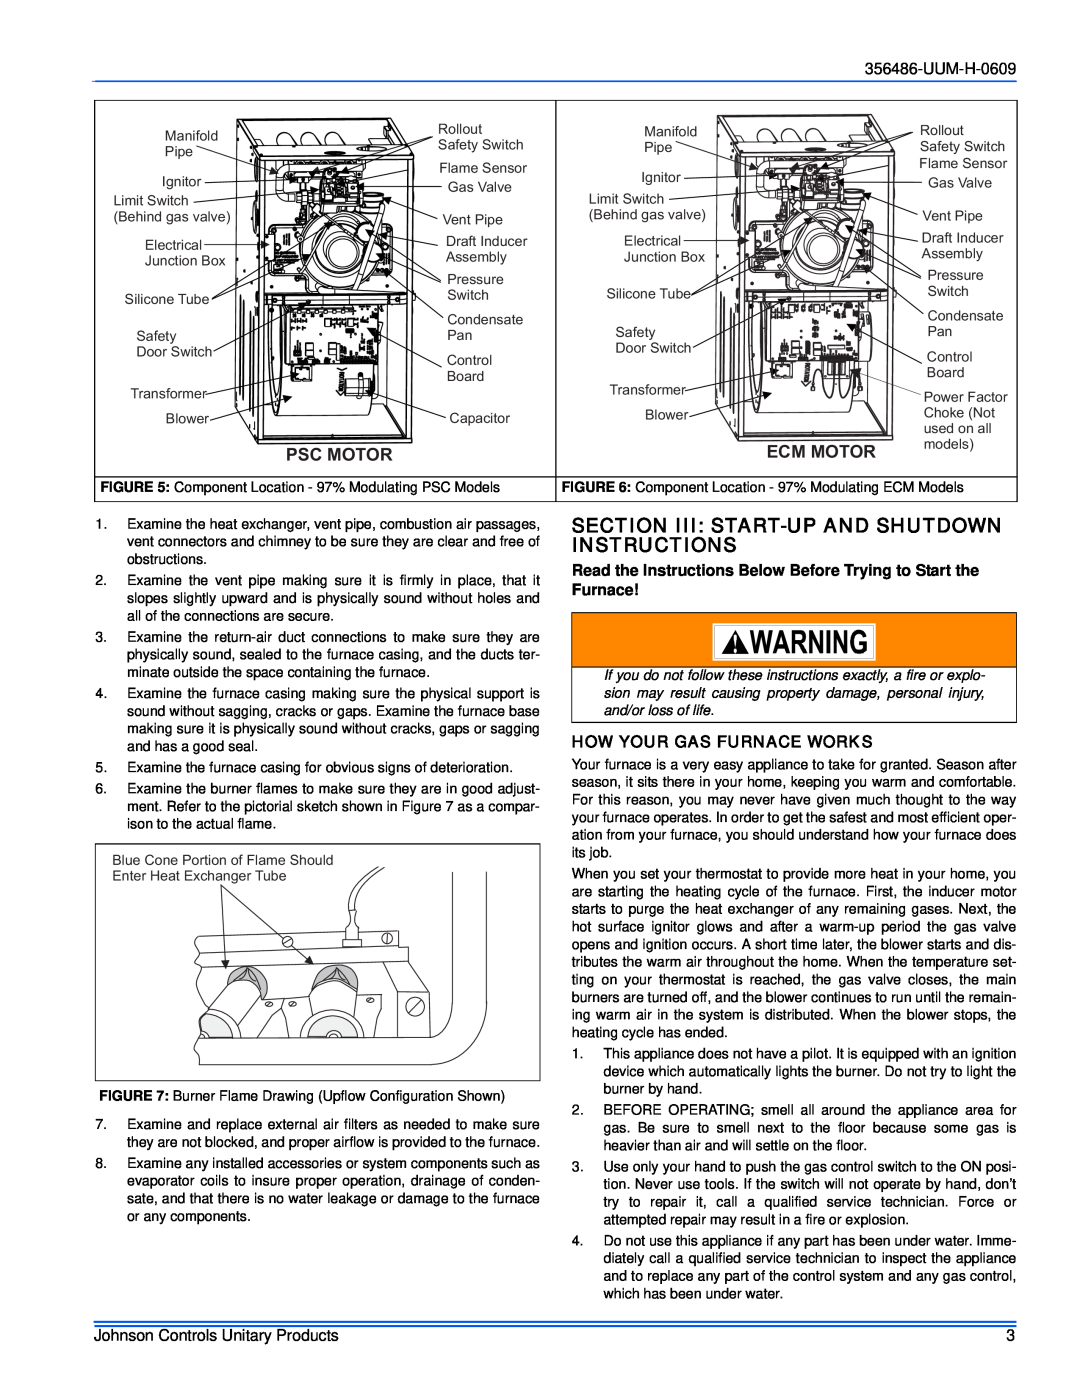 Johnson Controls 356486-UUM-H-0609 Section Iii Start-Upand Shutdown Instructions, How Your Gas Furnace Works, Psc Motor 